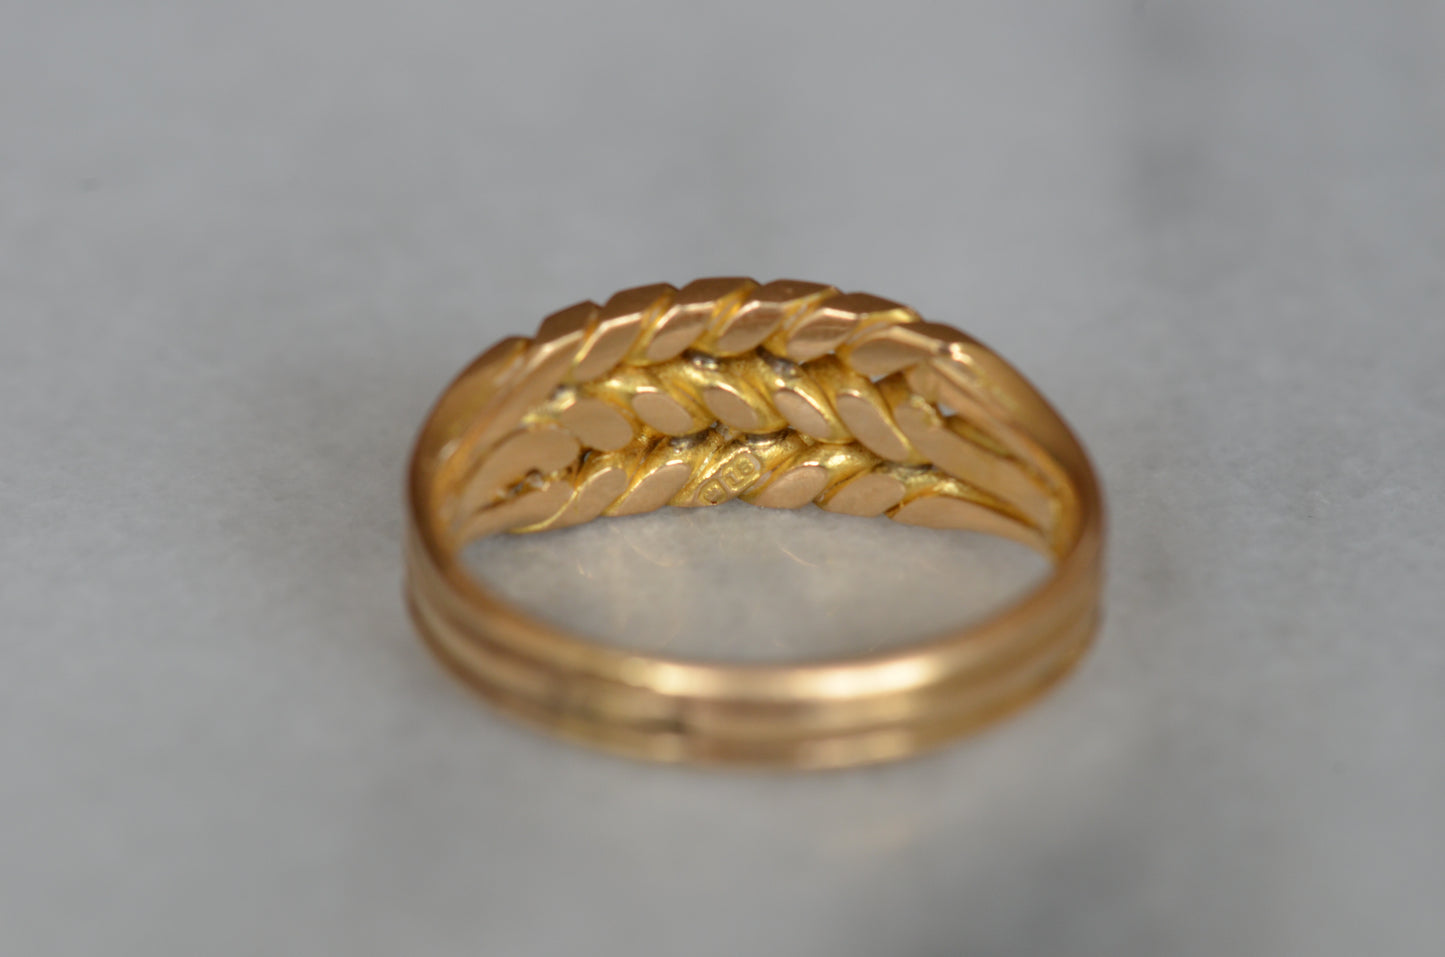 Gorgeous Antique Keeper Ring